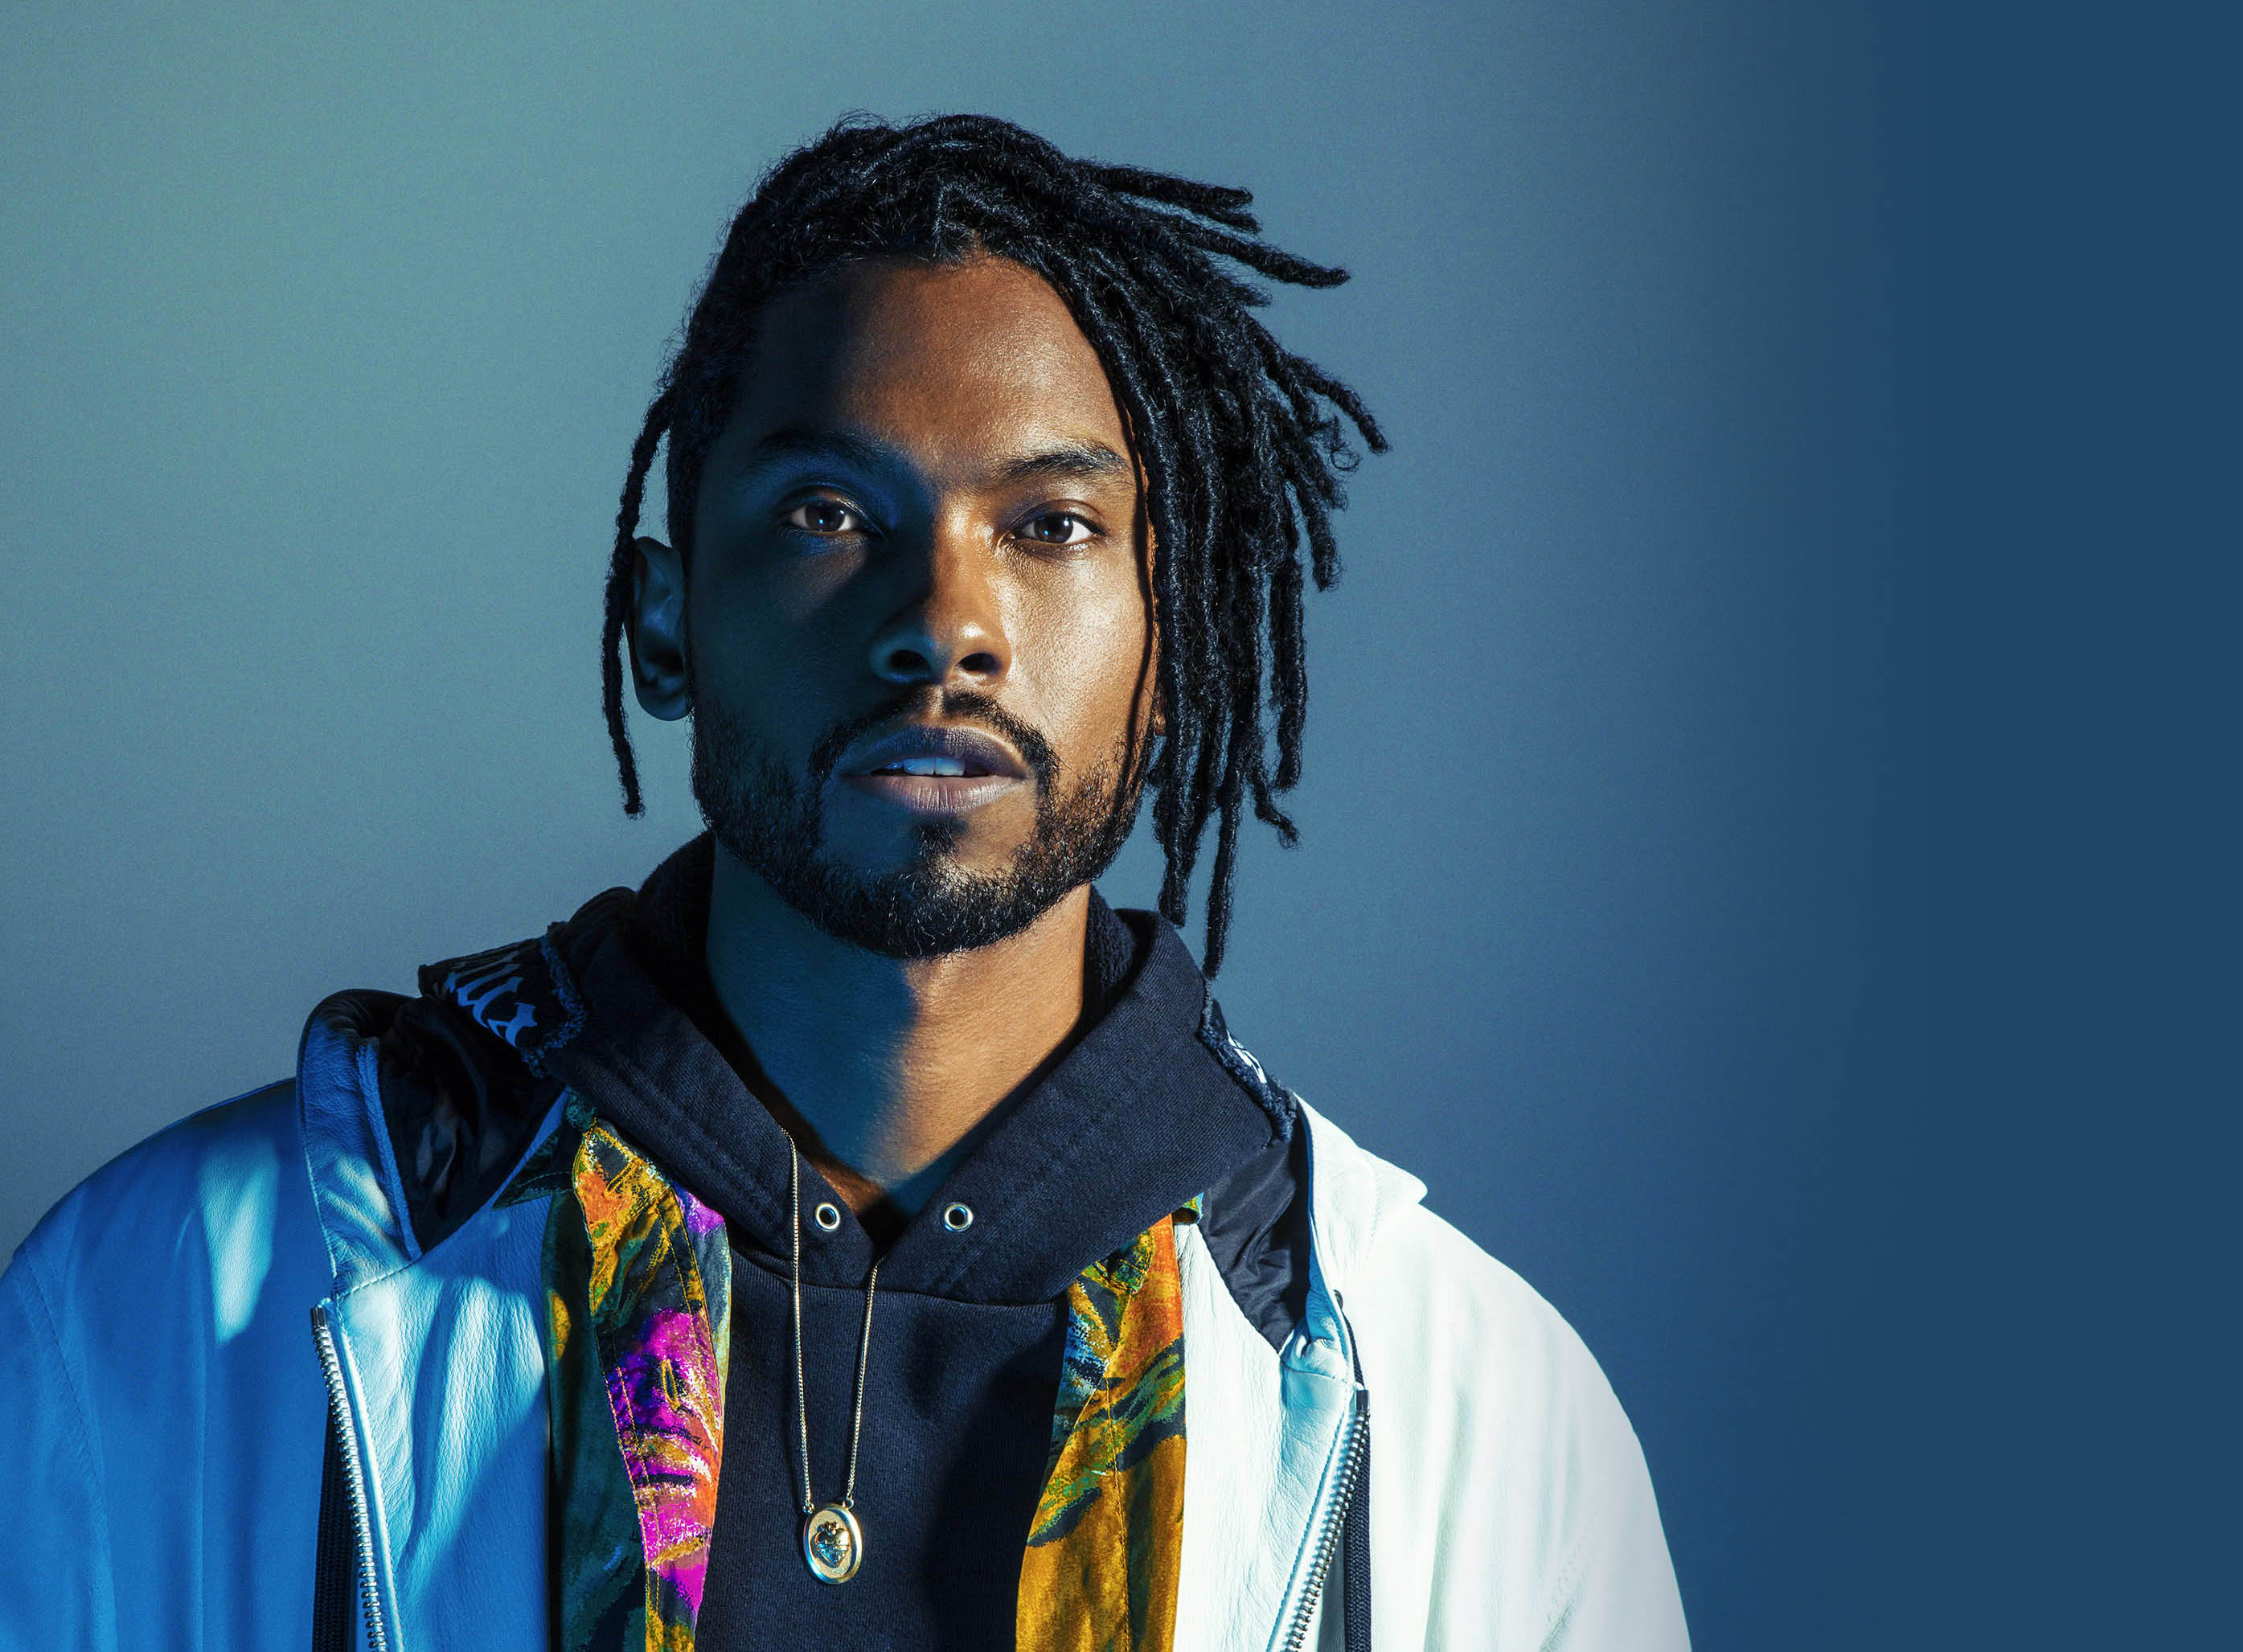 Concert Preview: Miguel at Showbox SoDo